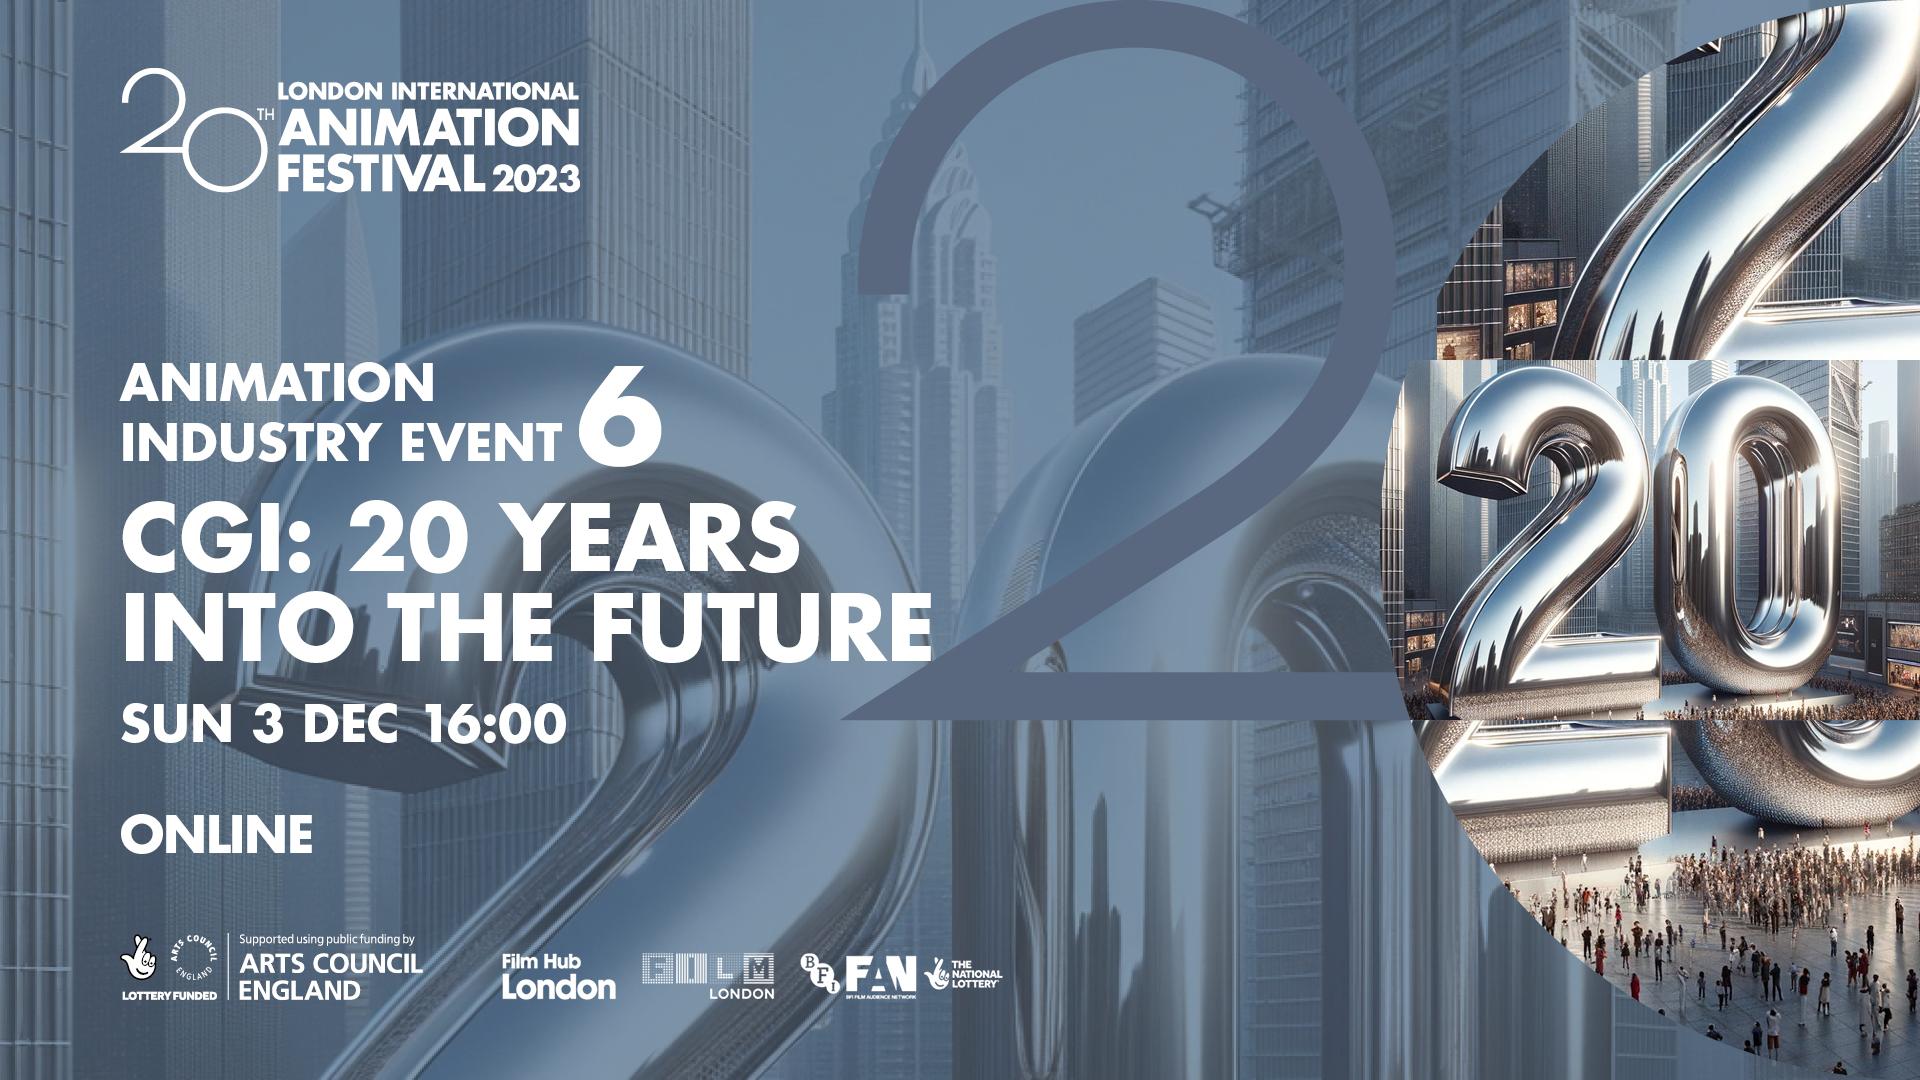 Animation Industry Event 6: CGI - 20 Years into the Future 